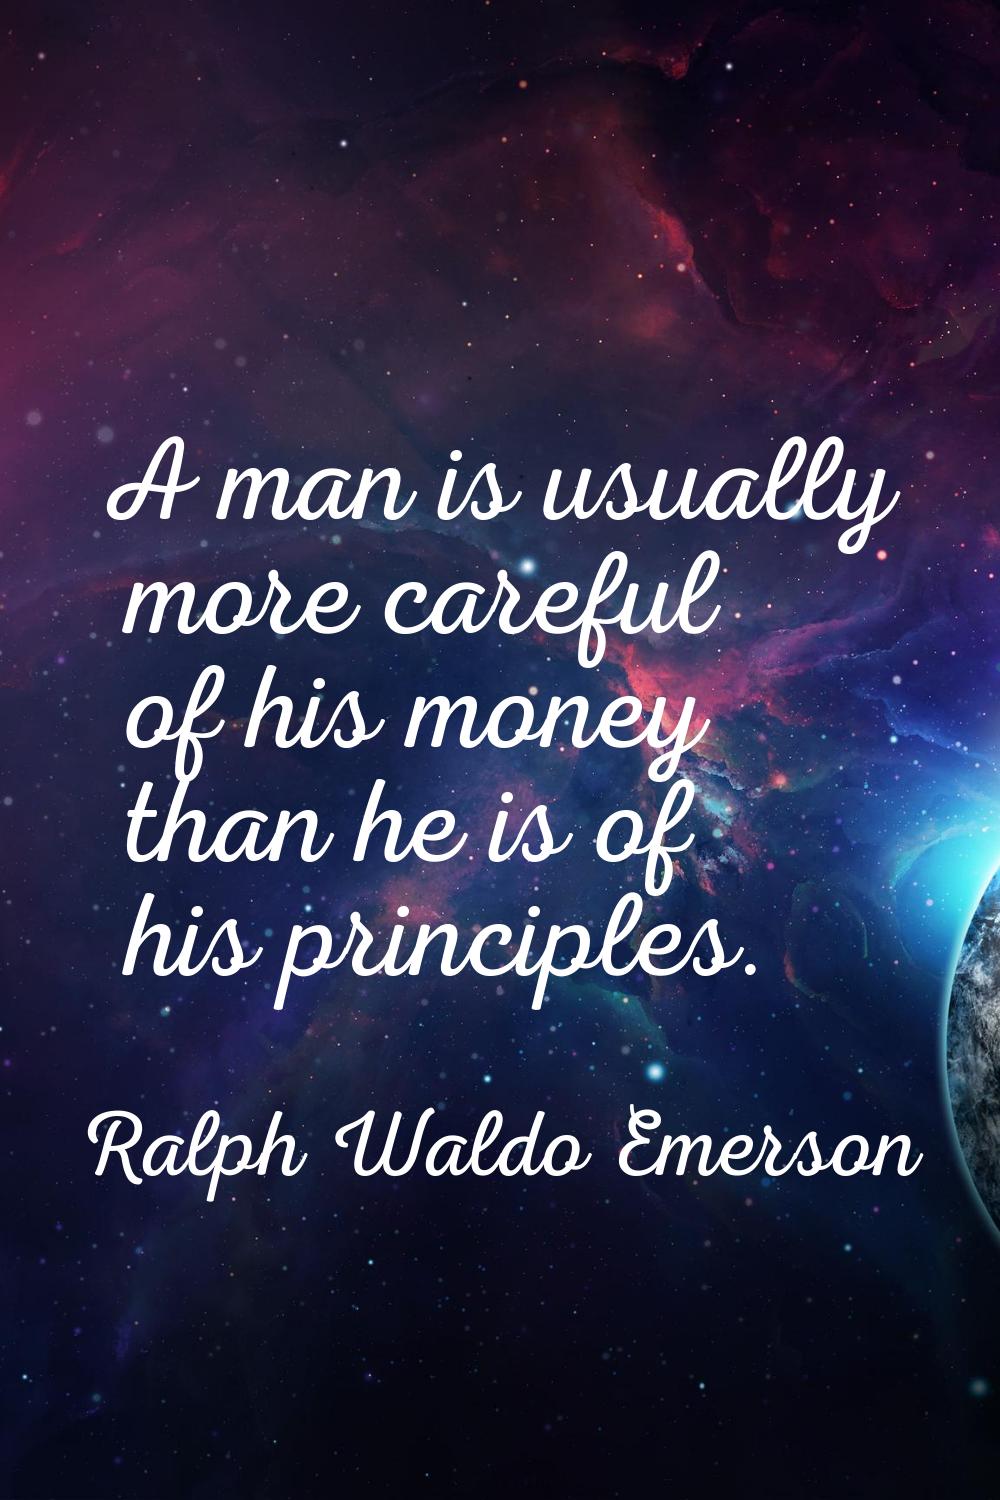 A man is usually more careful of his money than he is of his principles.